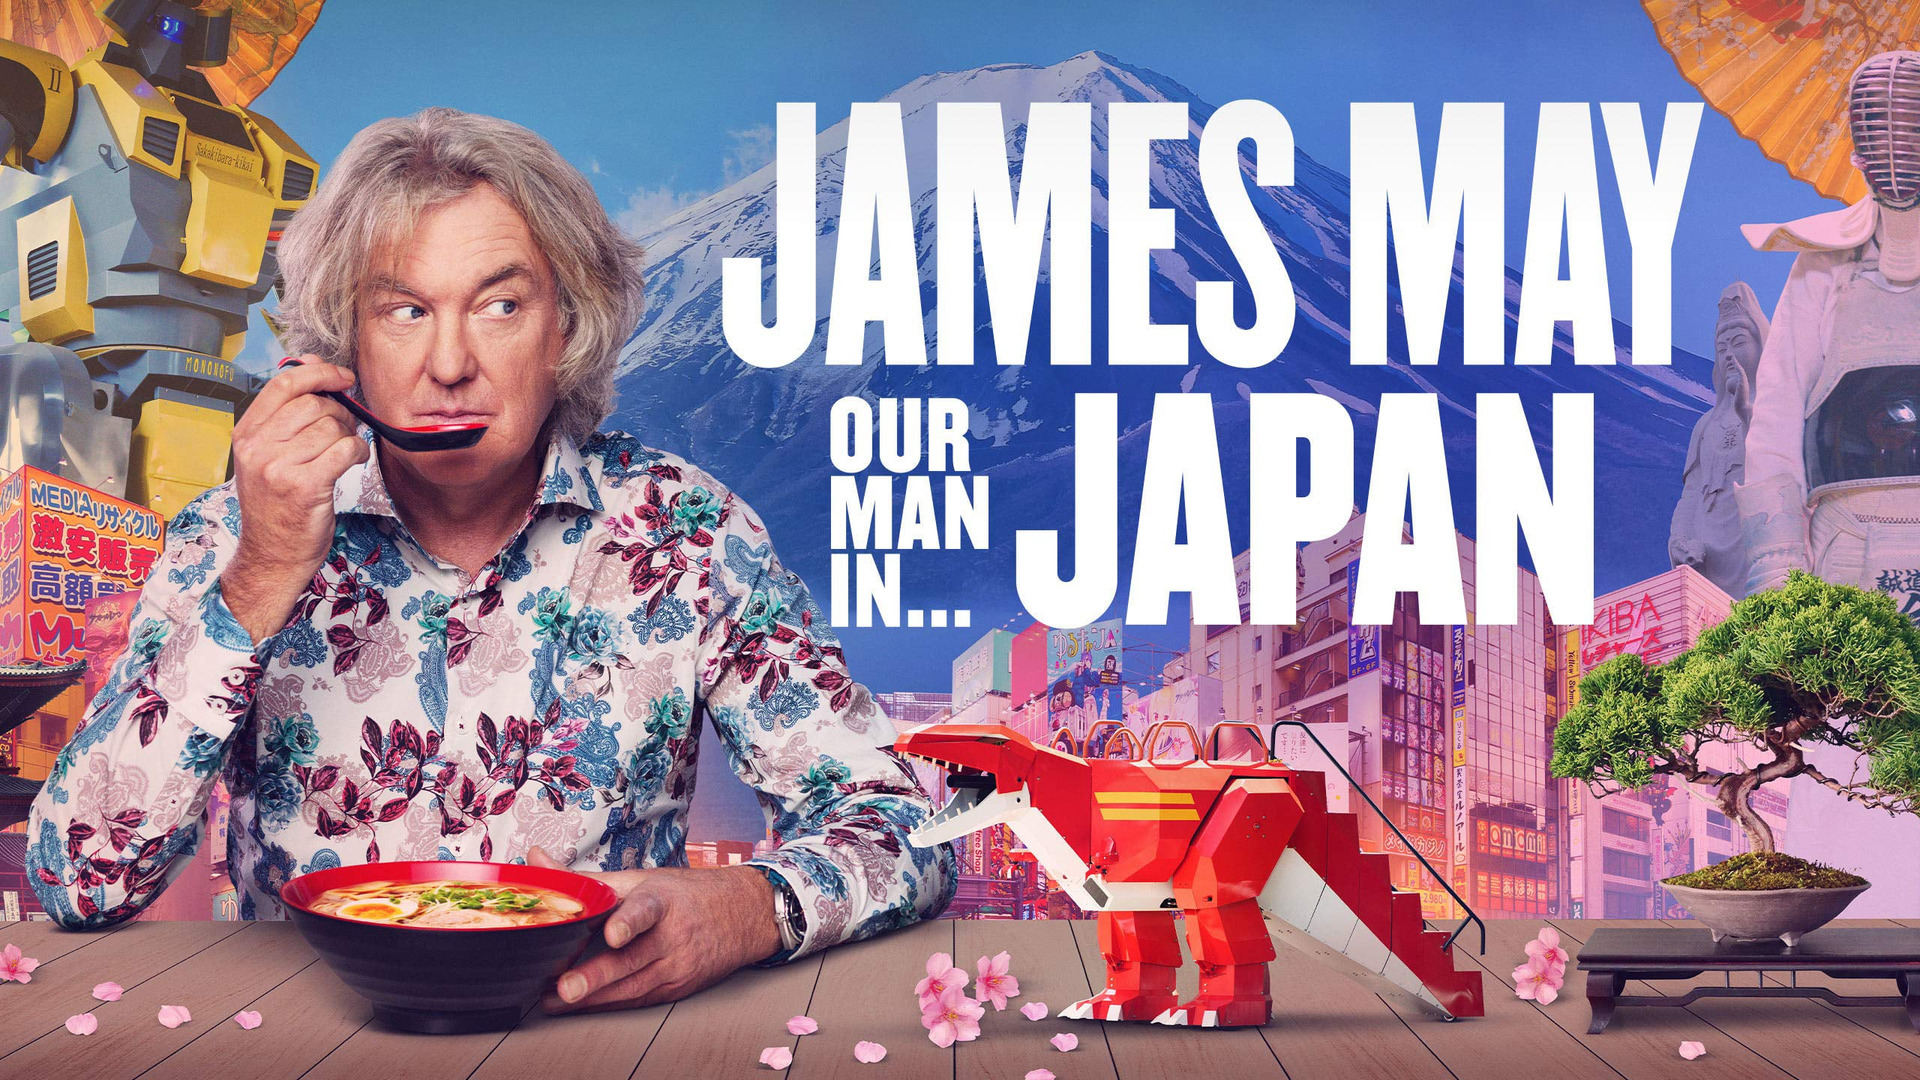 Show James May: Our Man In…